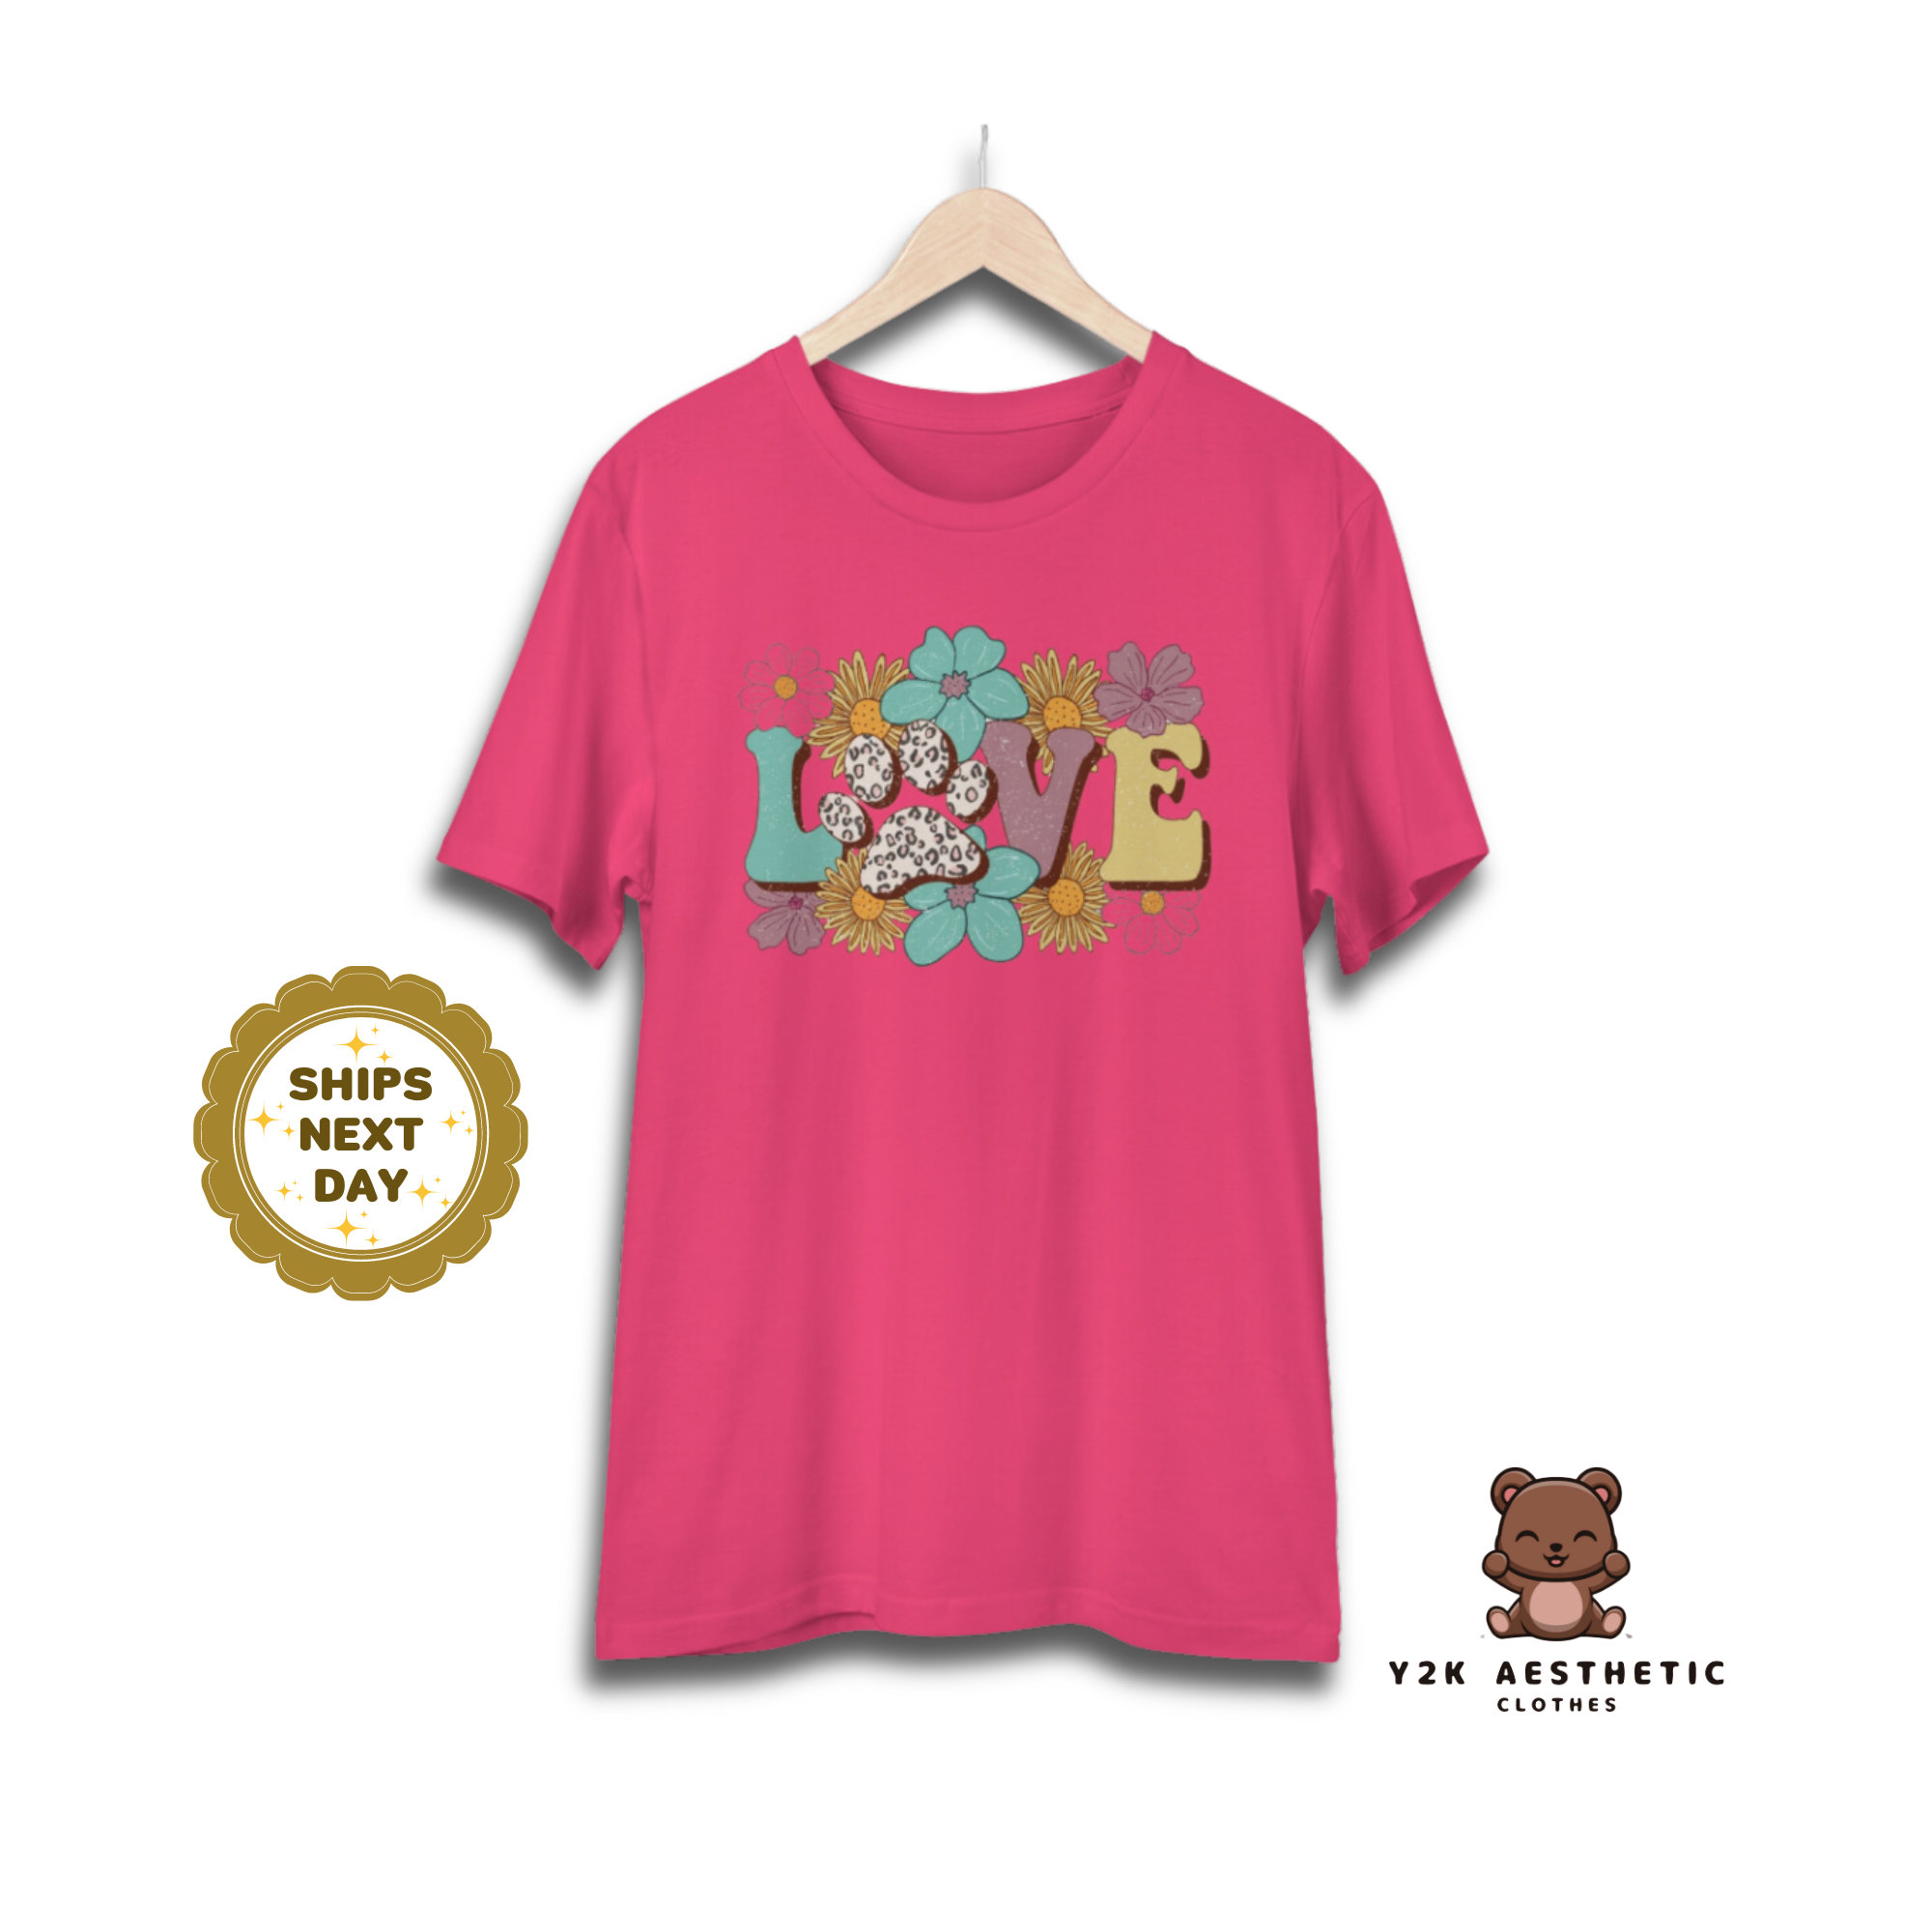 Vintage Love Shirt for Y2K Aesthetic Clothing